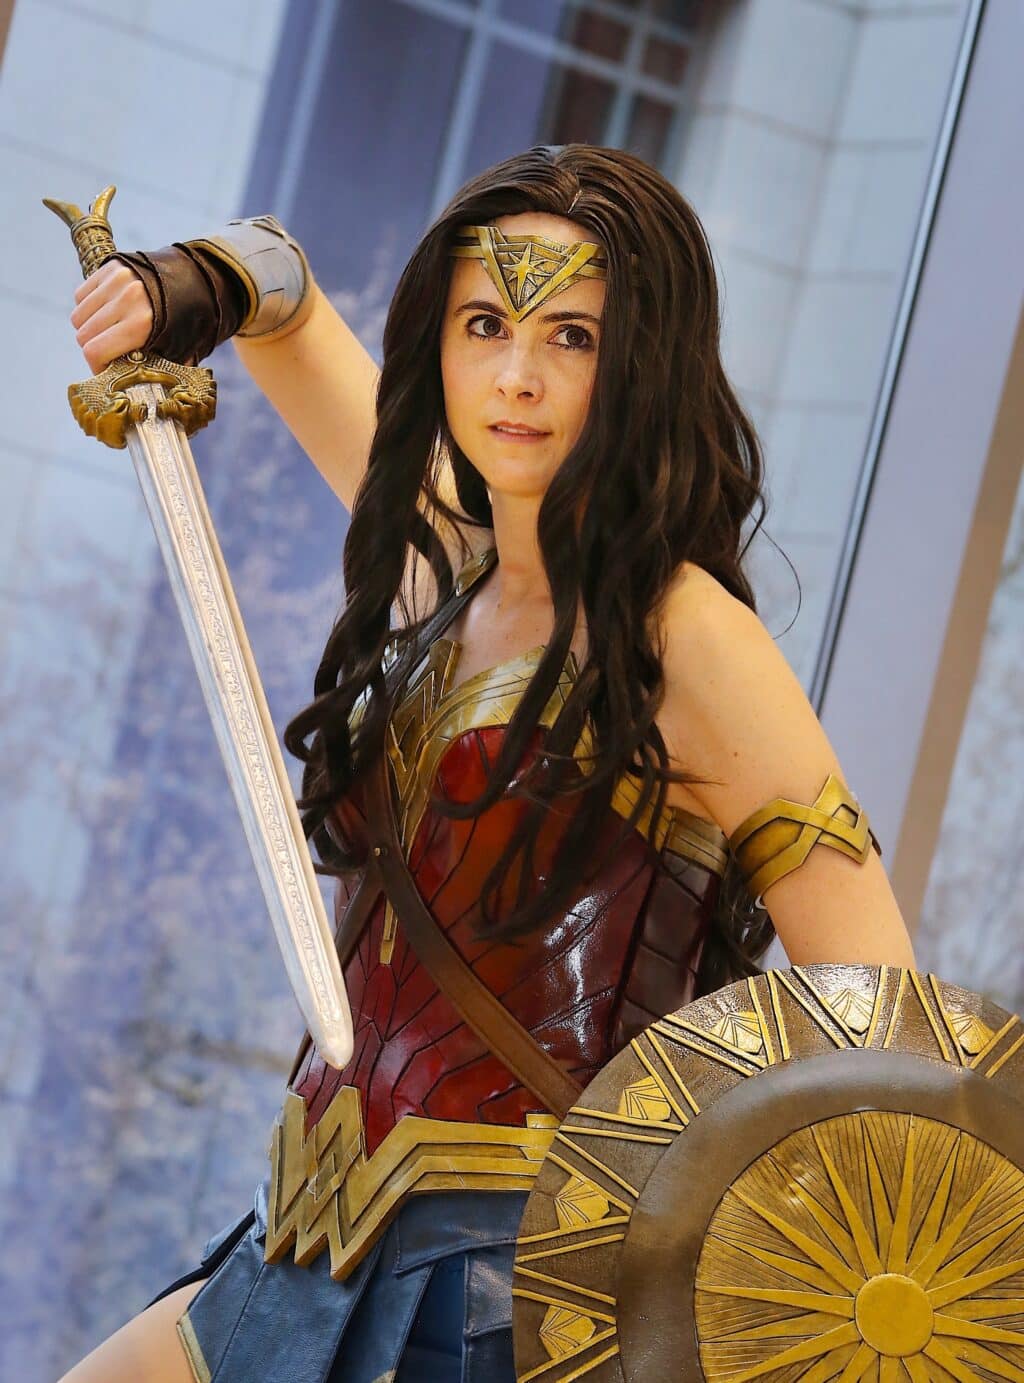 Innovative Cosplay cosplaying as Wonder Woman.